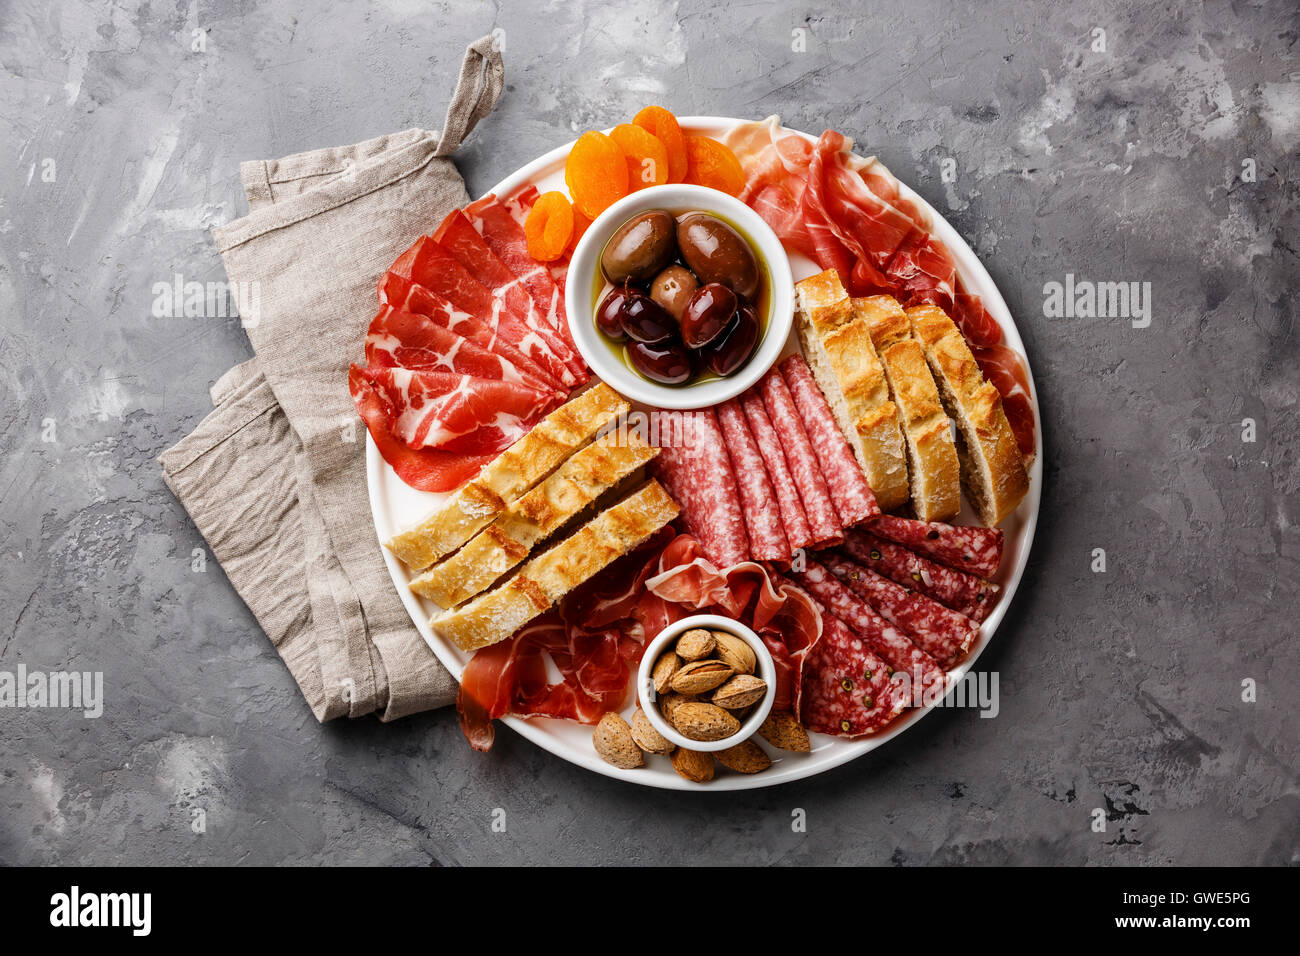 Cold meat plate with prosciutto, salami, ciabatta bread and olives on gray concrete stone background Stock Photo